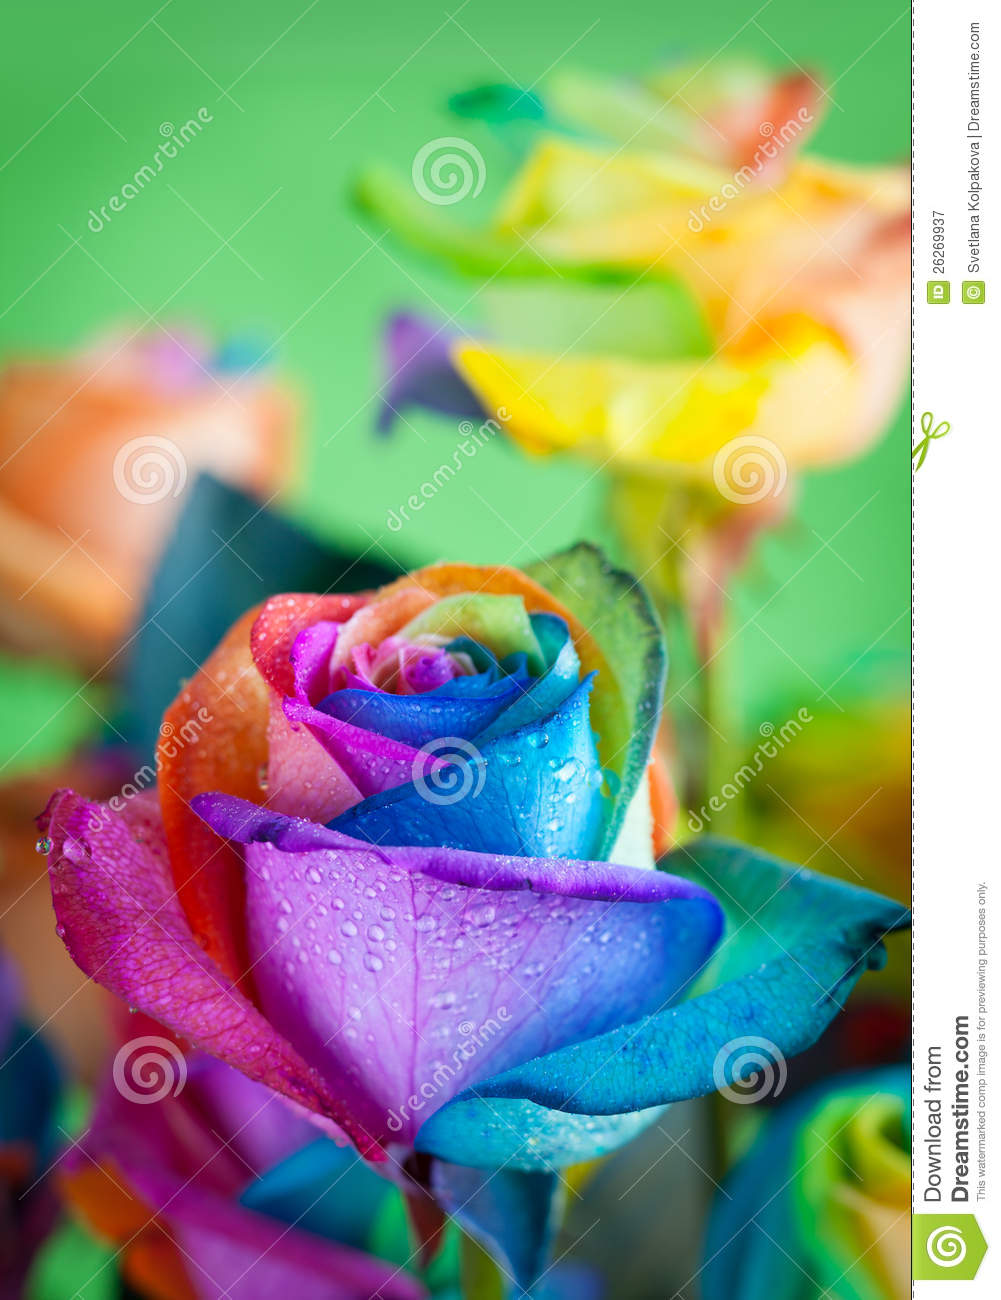 Multi Colored Roses Royalty Free Stock Photography   Image  26269937